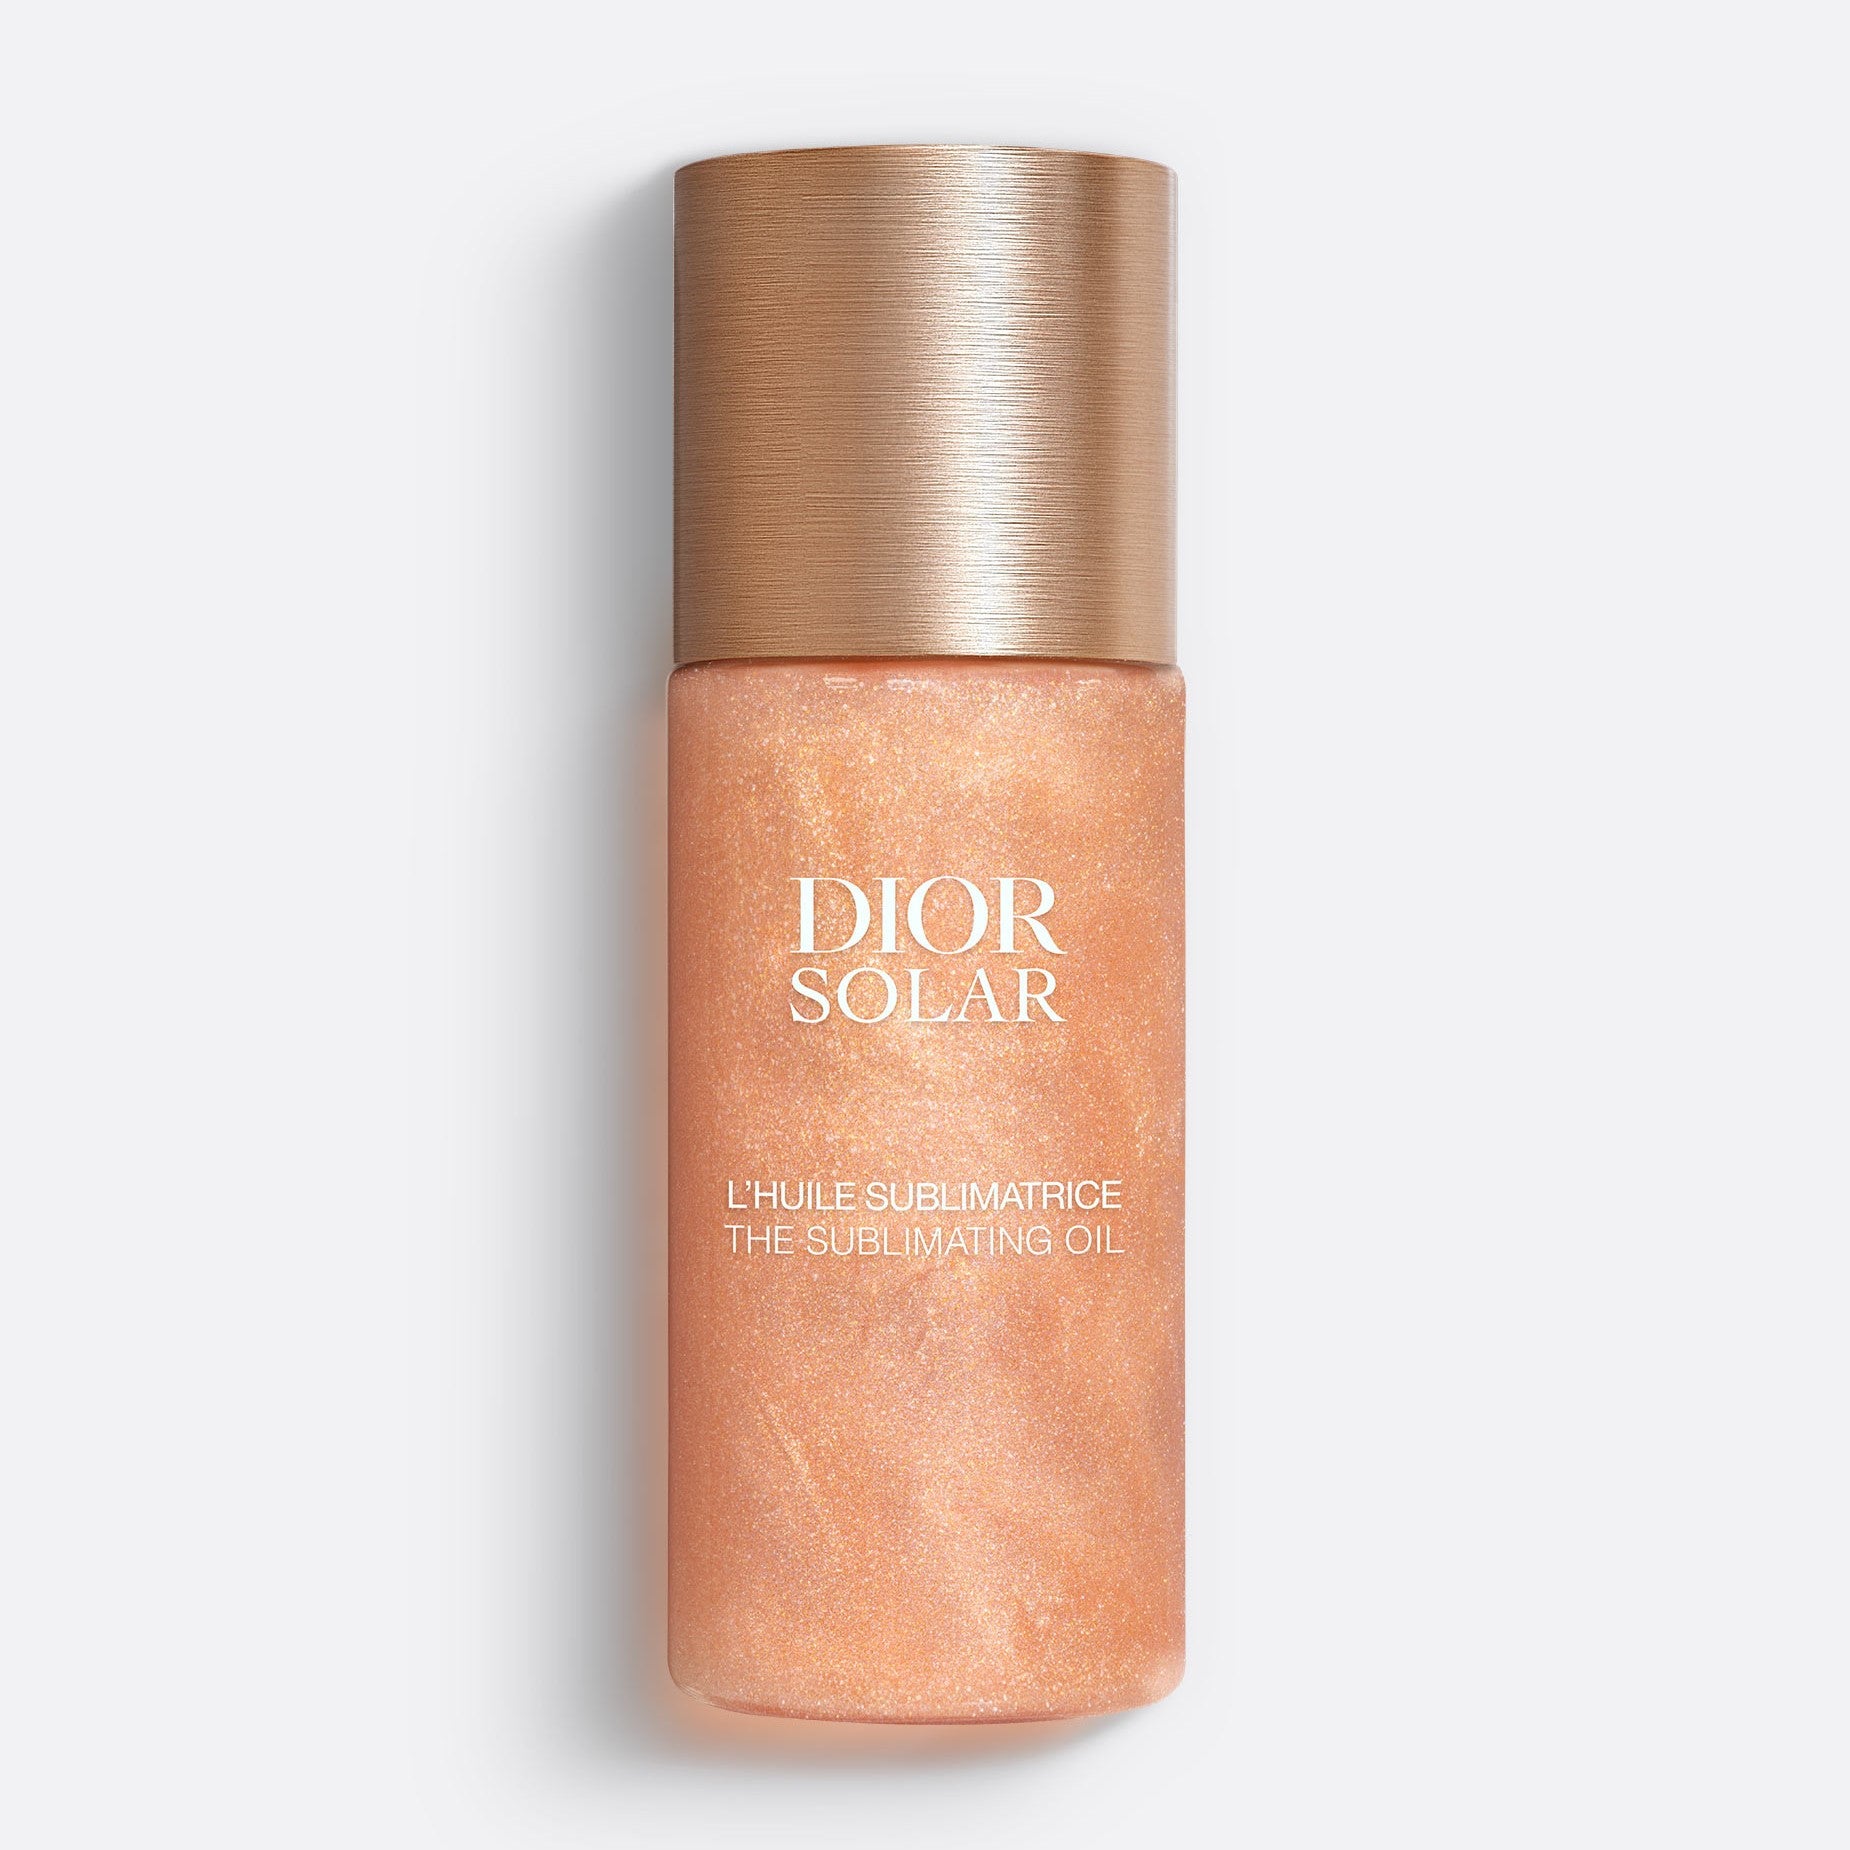 DIOR SOLAR THE SUBLIMATING OIL | Face, Body and Hair Oil